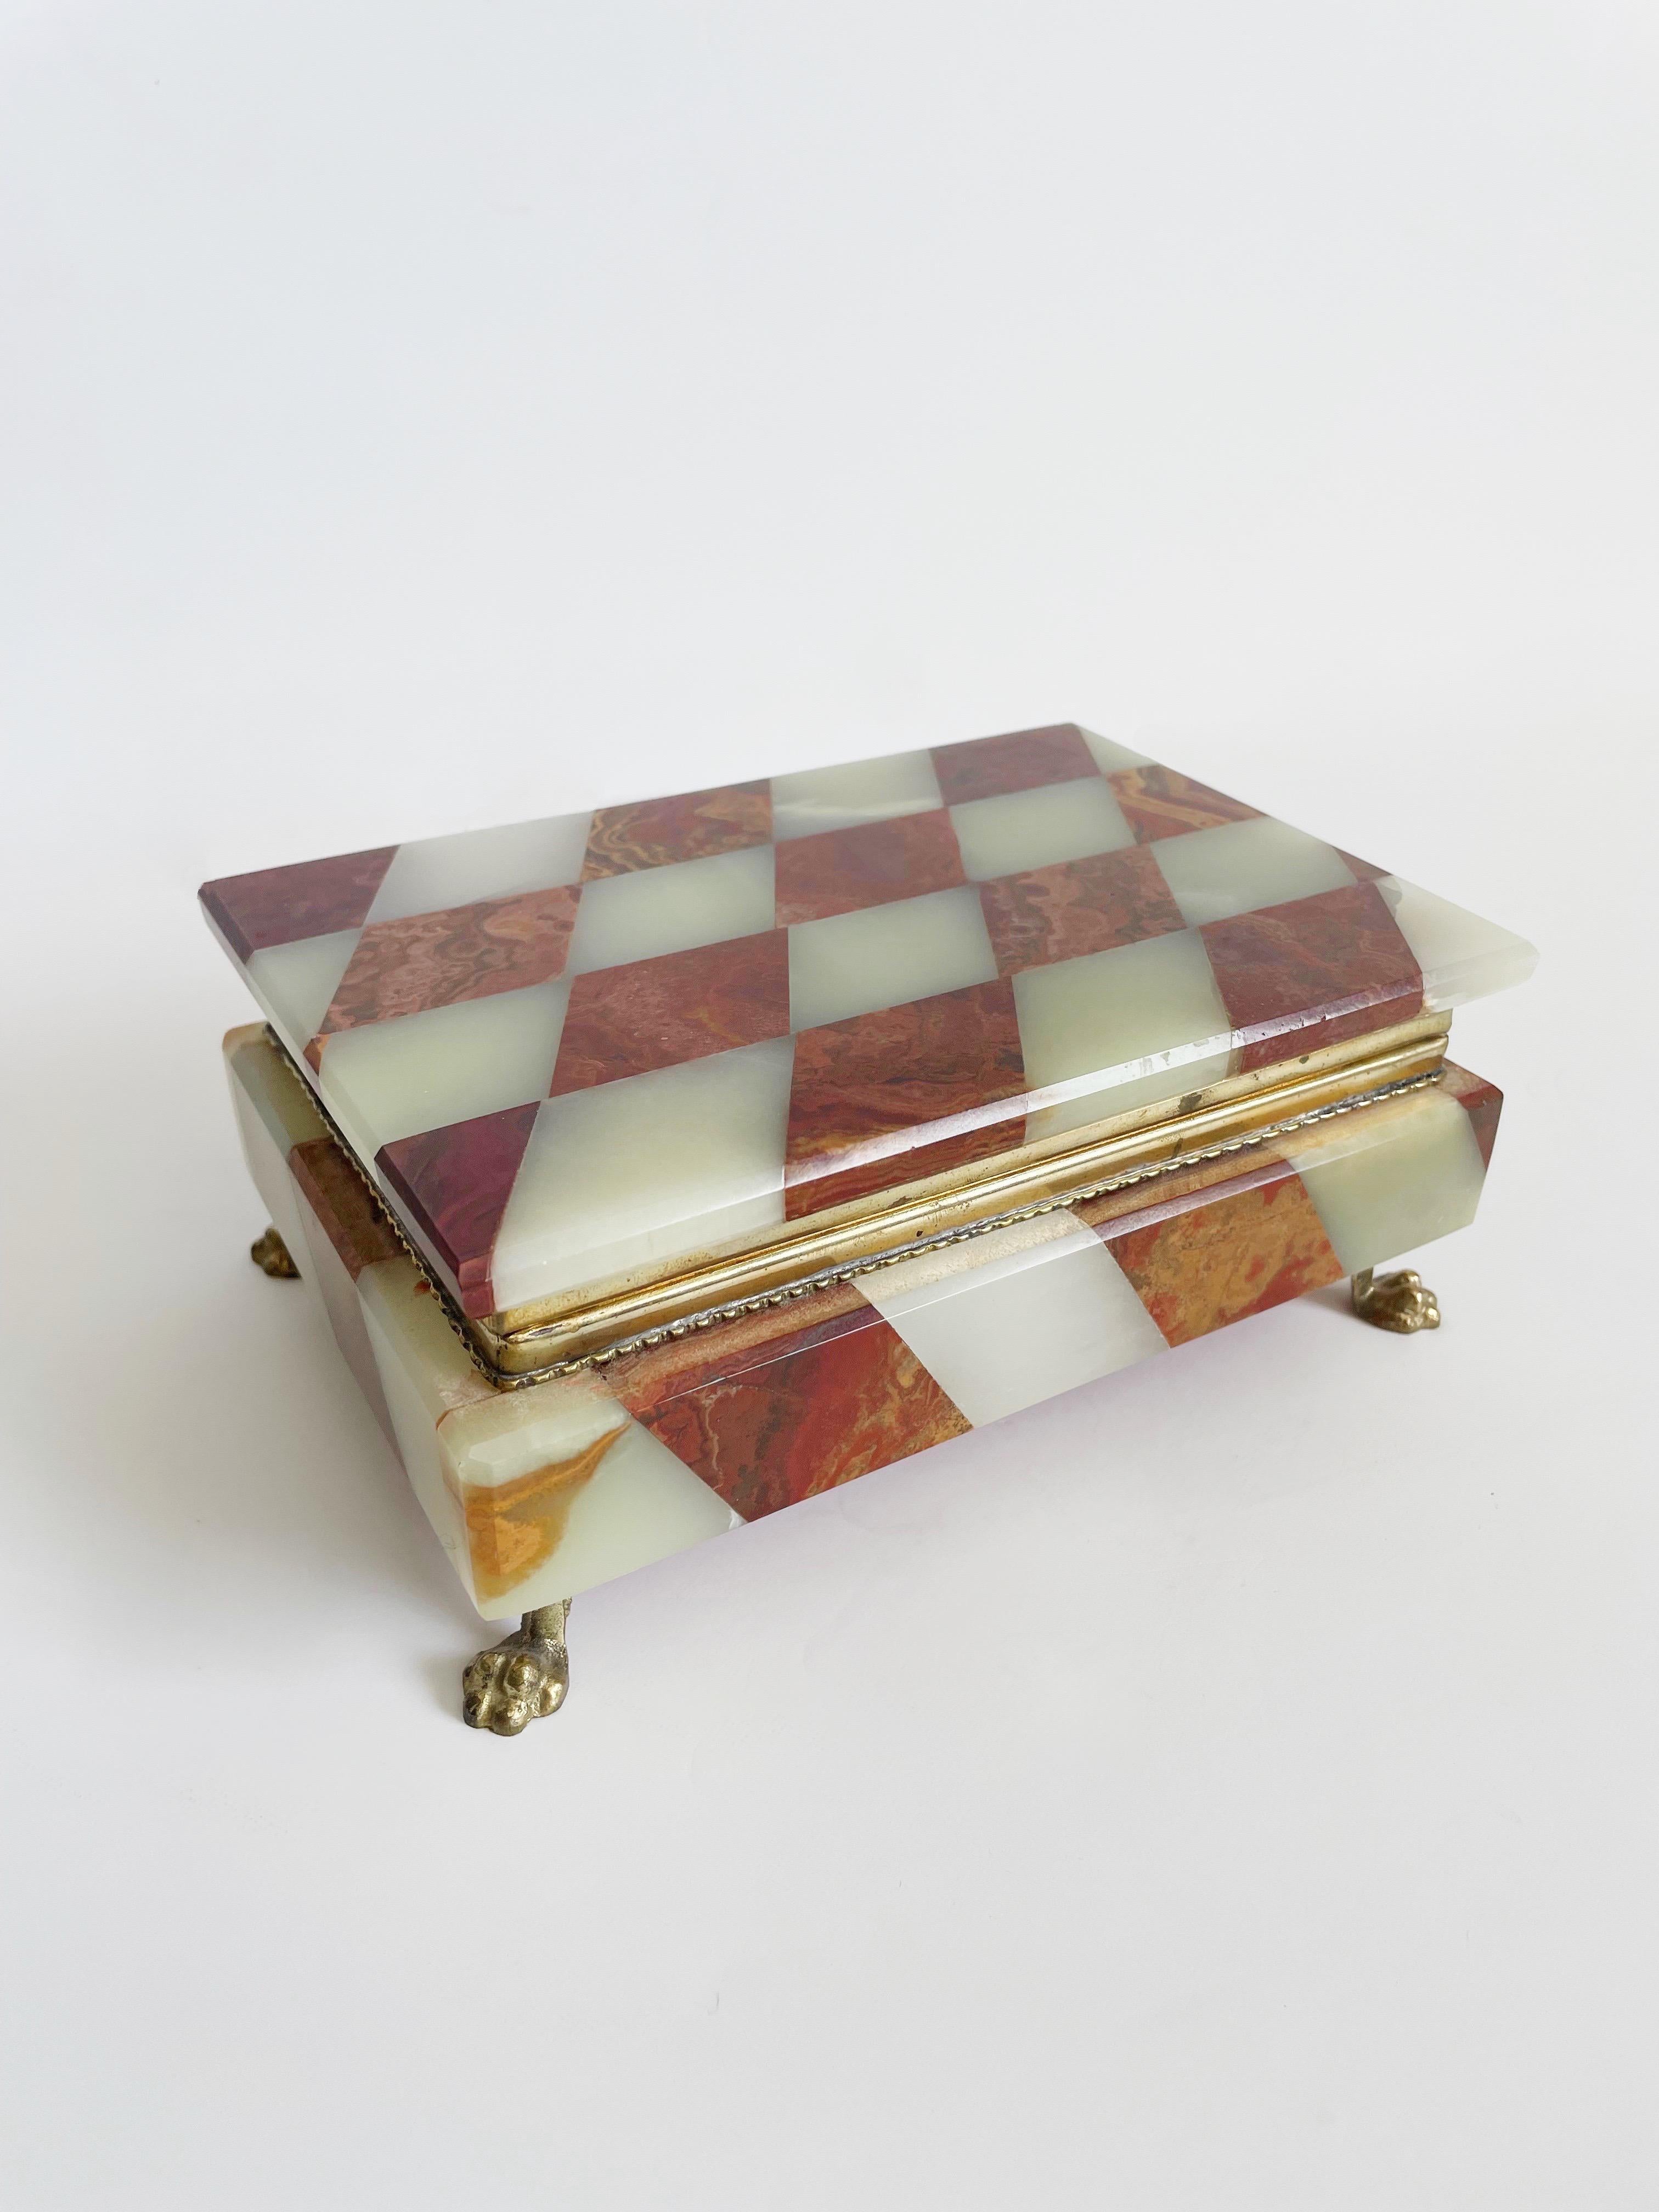 Opulent Italian alabaster box with red agate and a red velvet lining to match. Features brass claw feet.